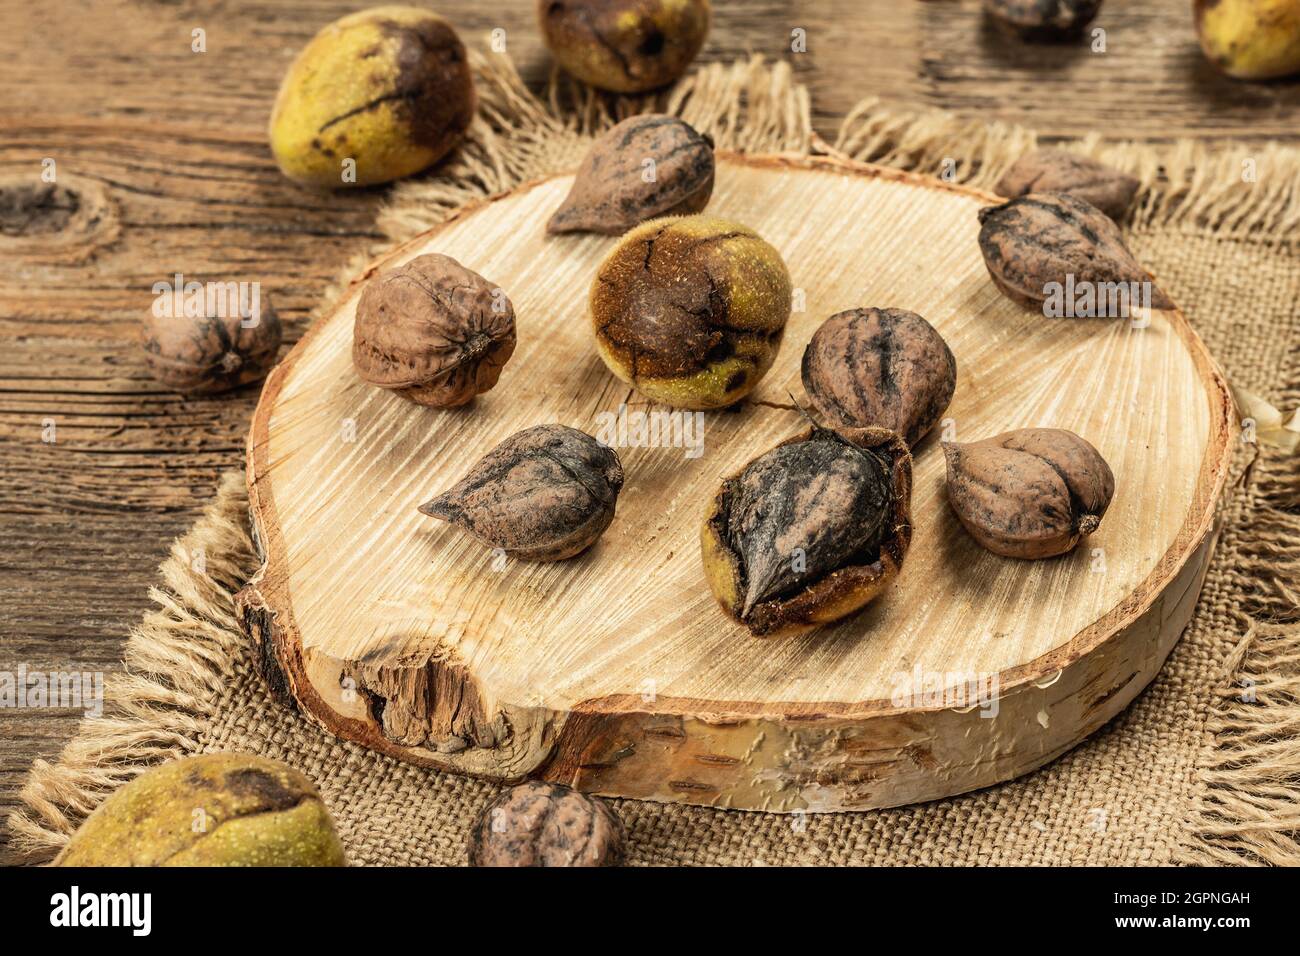 Ripe Juglans cordiformis Maxim or heart-shaped walnut. Young green and unpeeled whole nuts on a stand. Vintage wooden boards background, close up Stock Photo